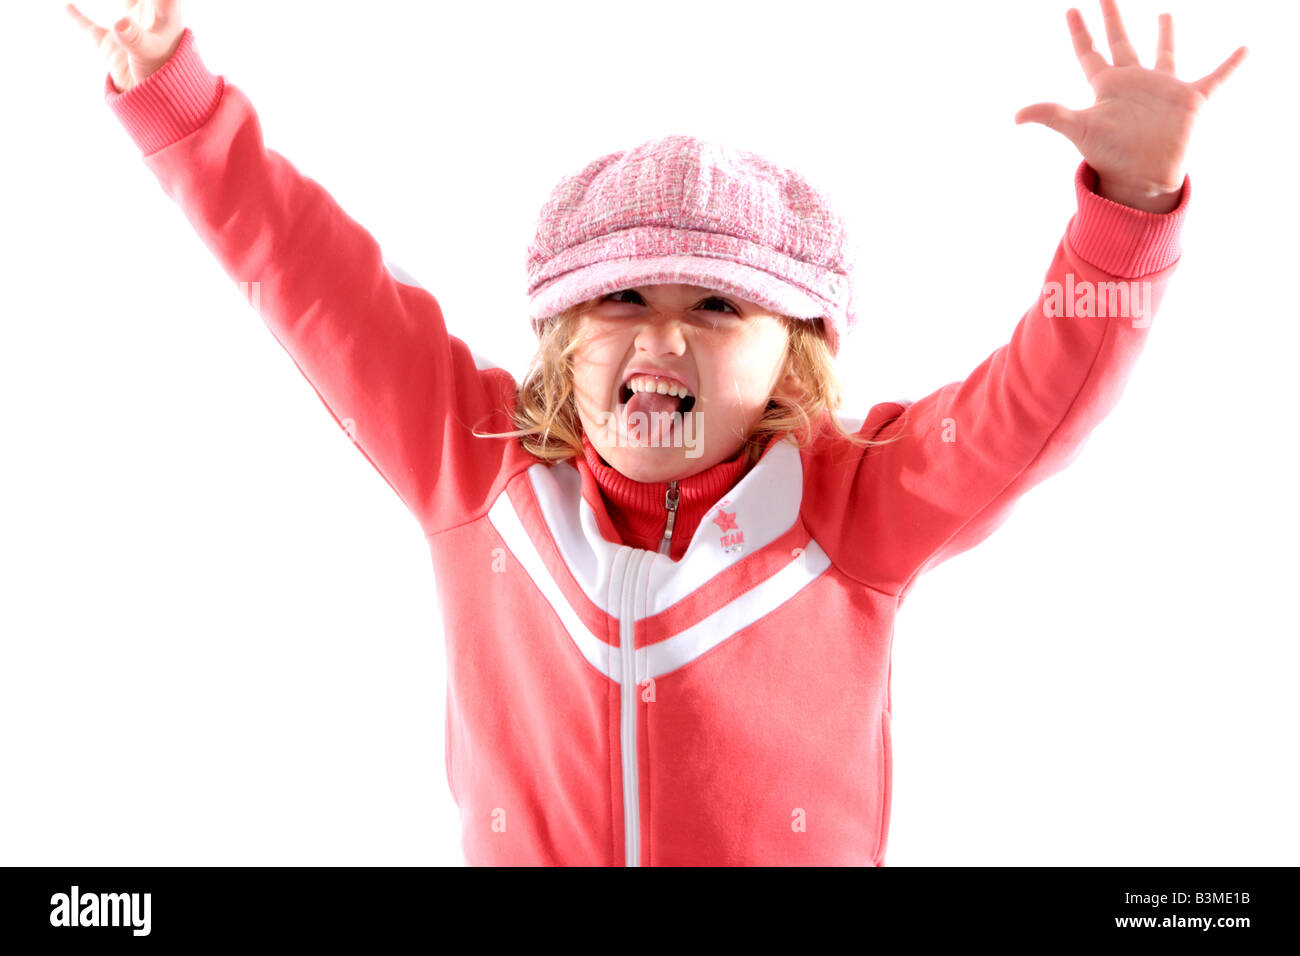 Young Girl Pulling Faces Model Released Stock Photo